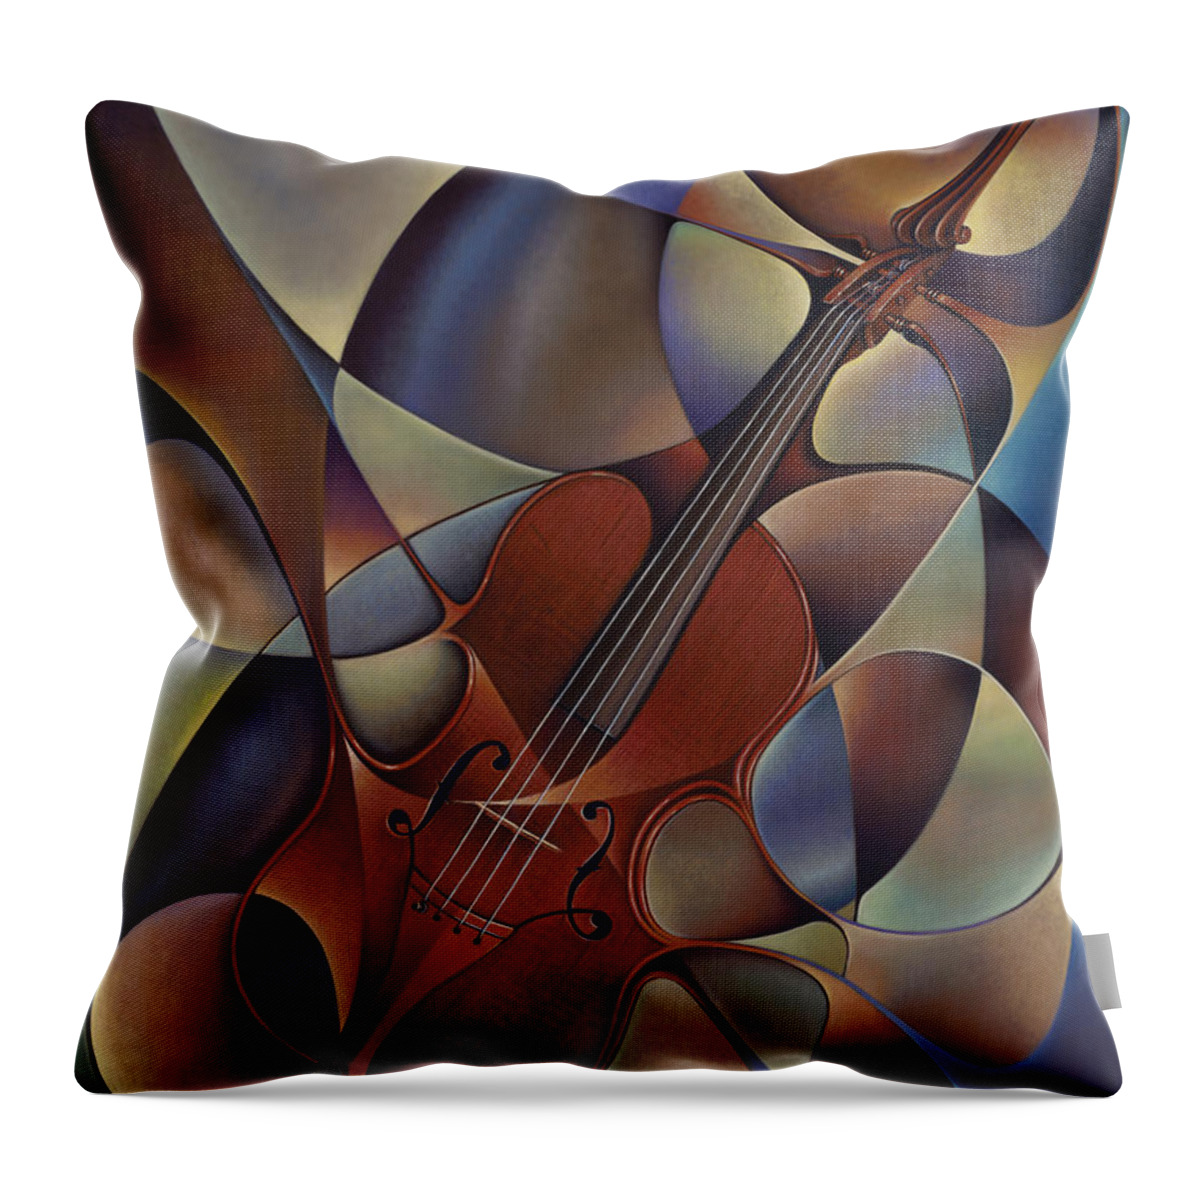 Violin Throw Pillow featuring the painting Dynamic Violin by Ricardo Chavez-Mendez